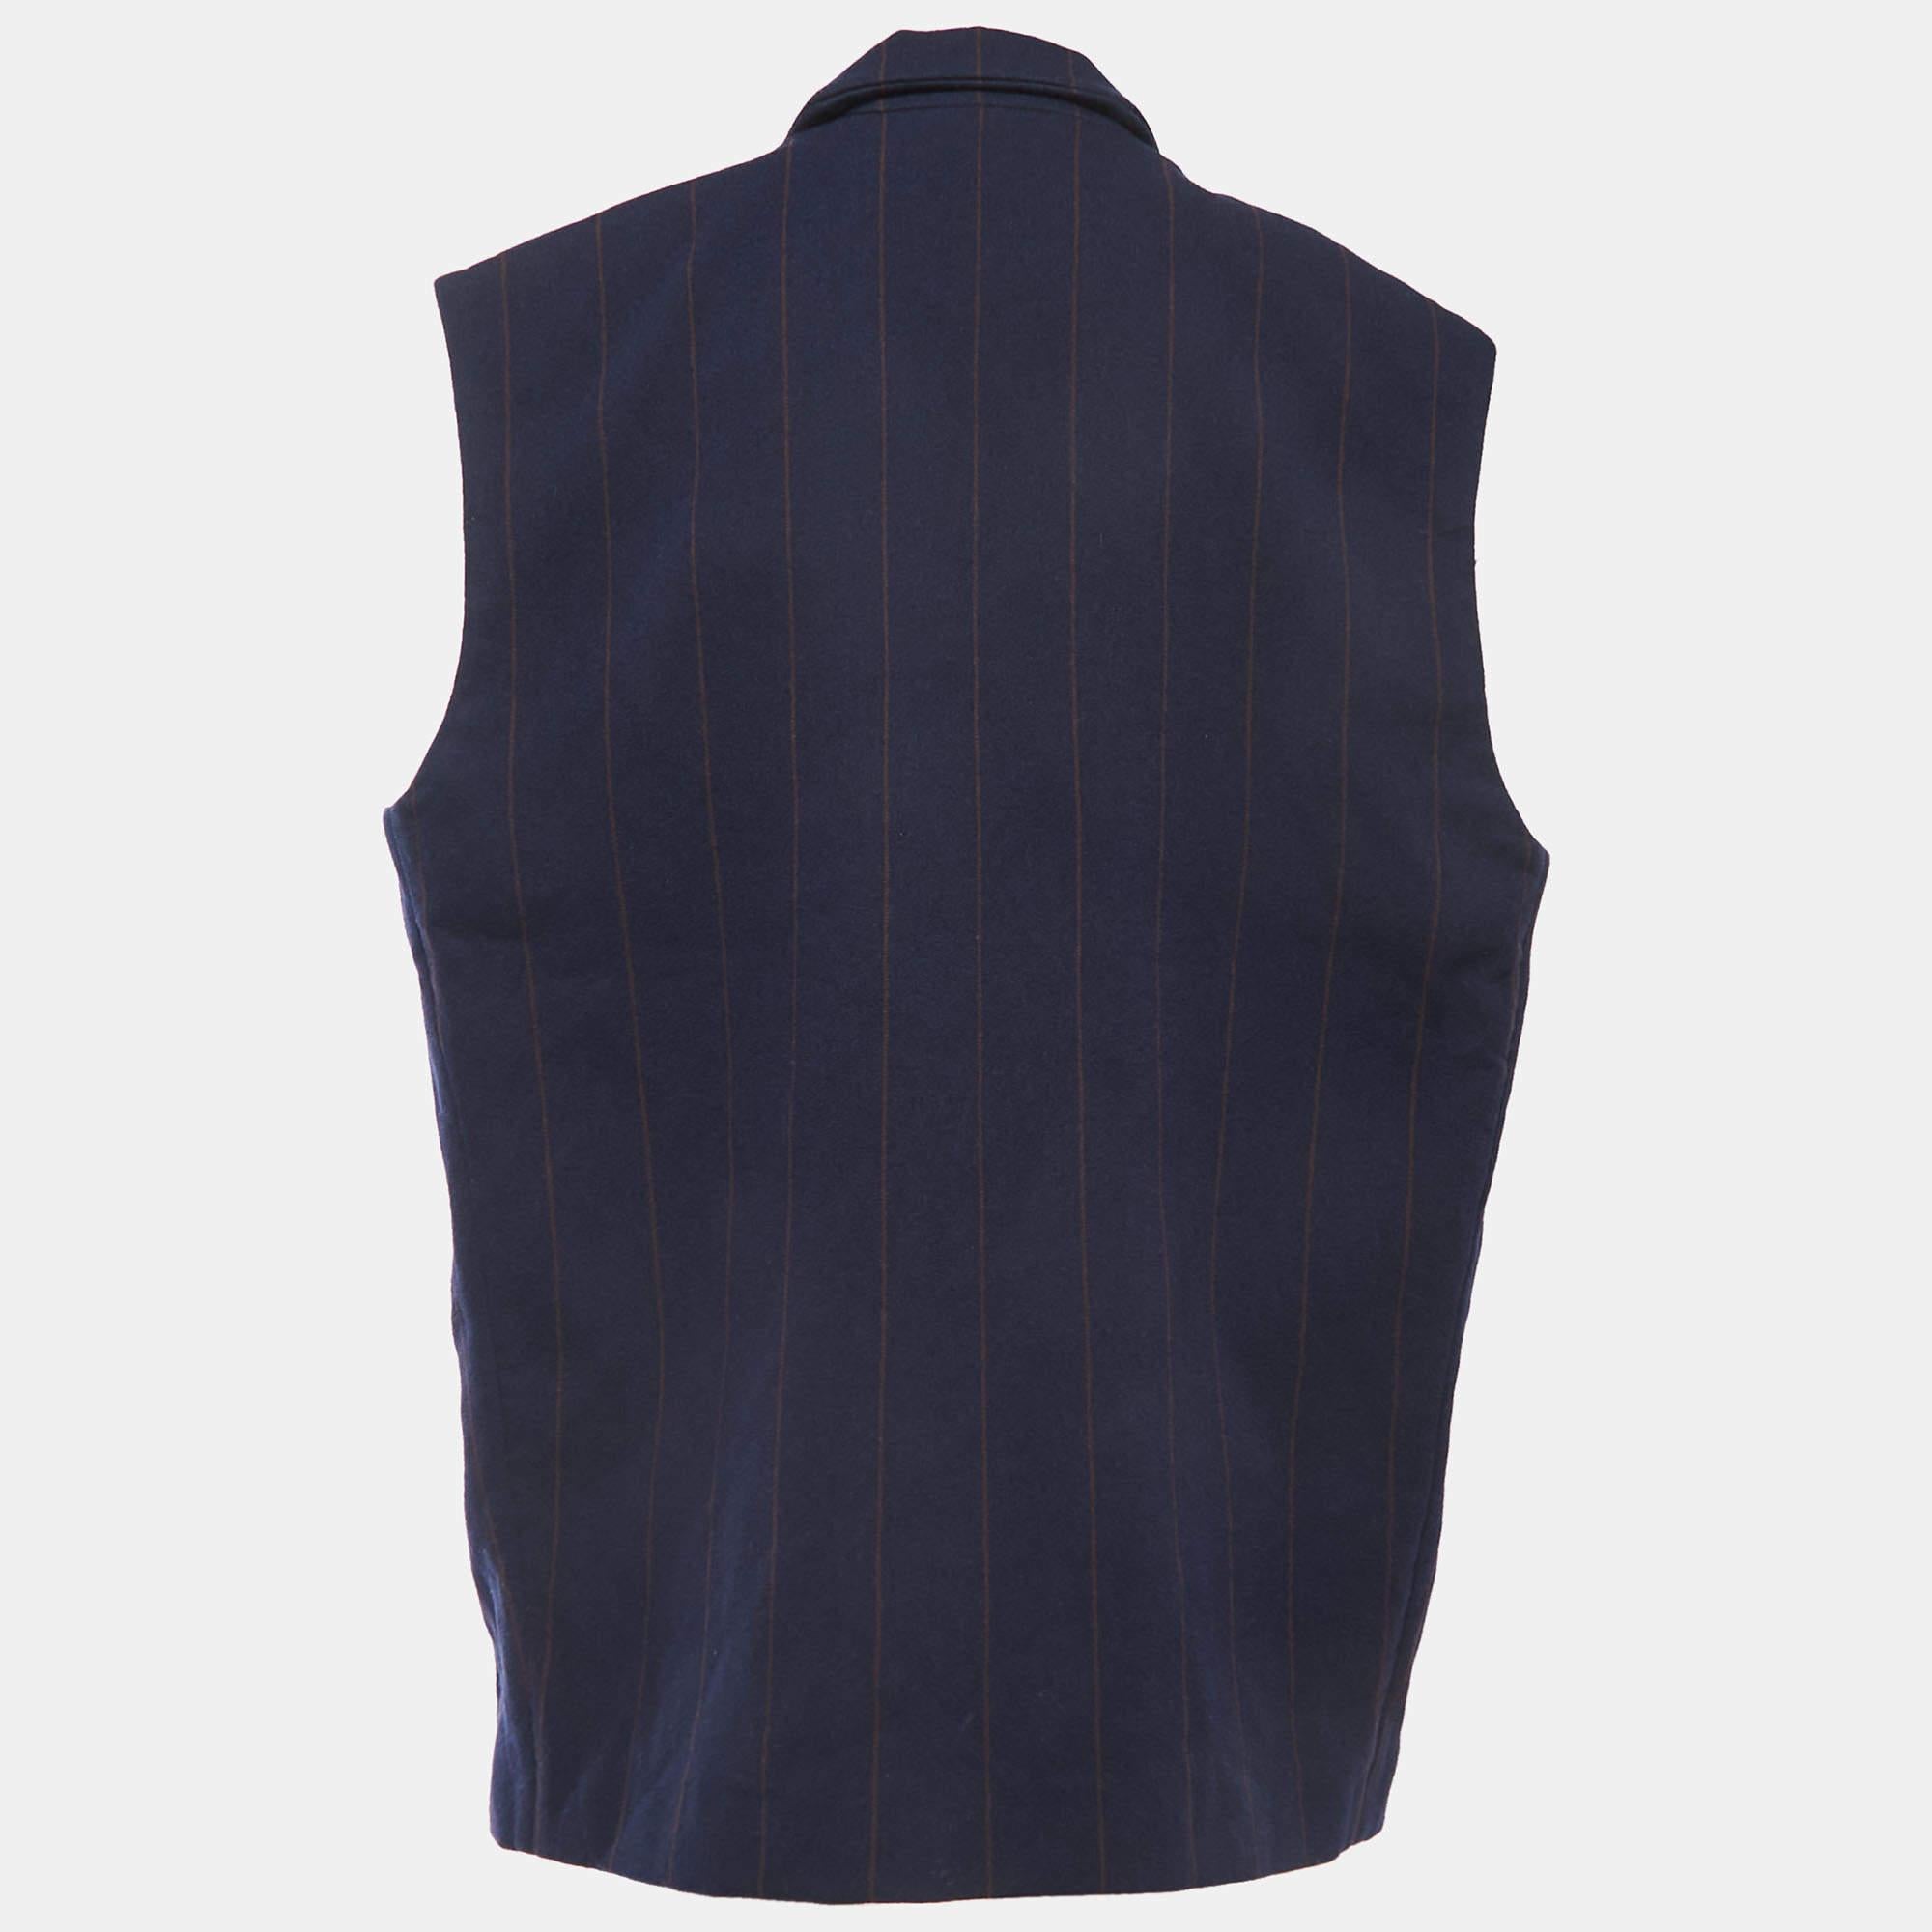 An elegant silhouette, smart fit, and perfect tailoring make this IRO women's vest jacket a fine choice. It is made of quality materials, secured with front button closure, and added with two pockets.

